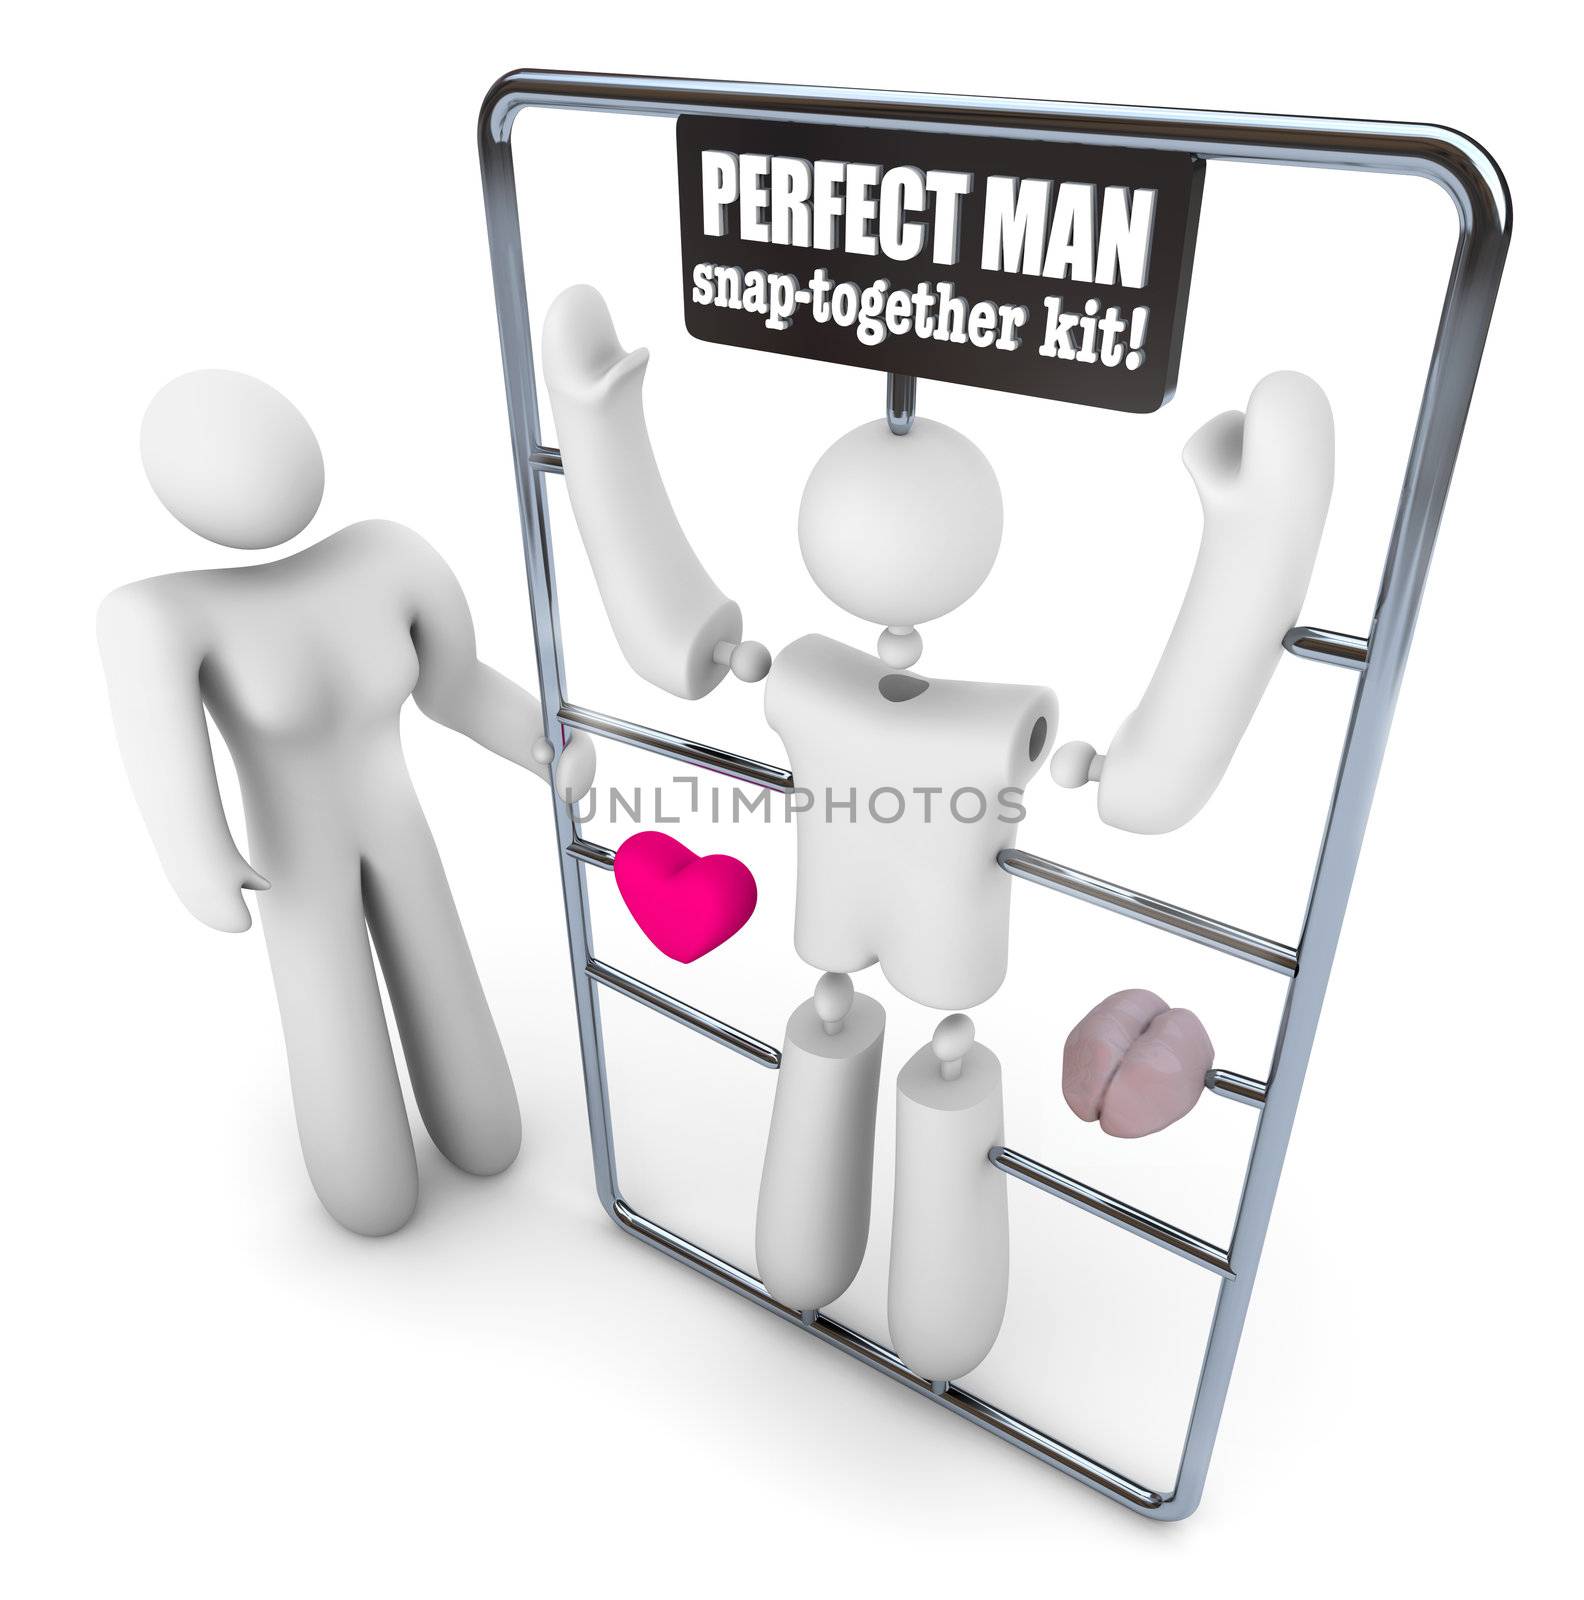 Build the Perfect Man Model Kit by iQoncept